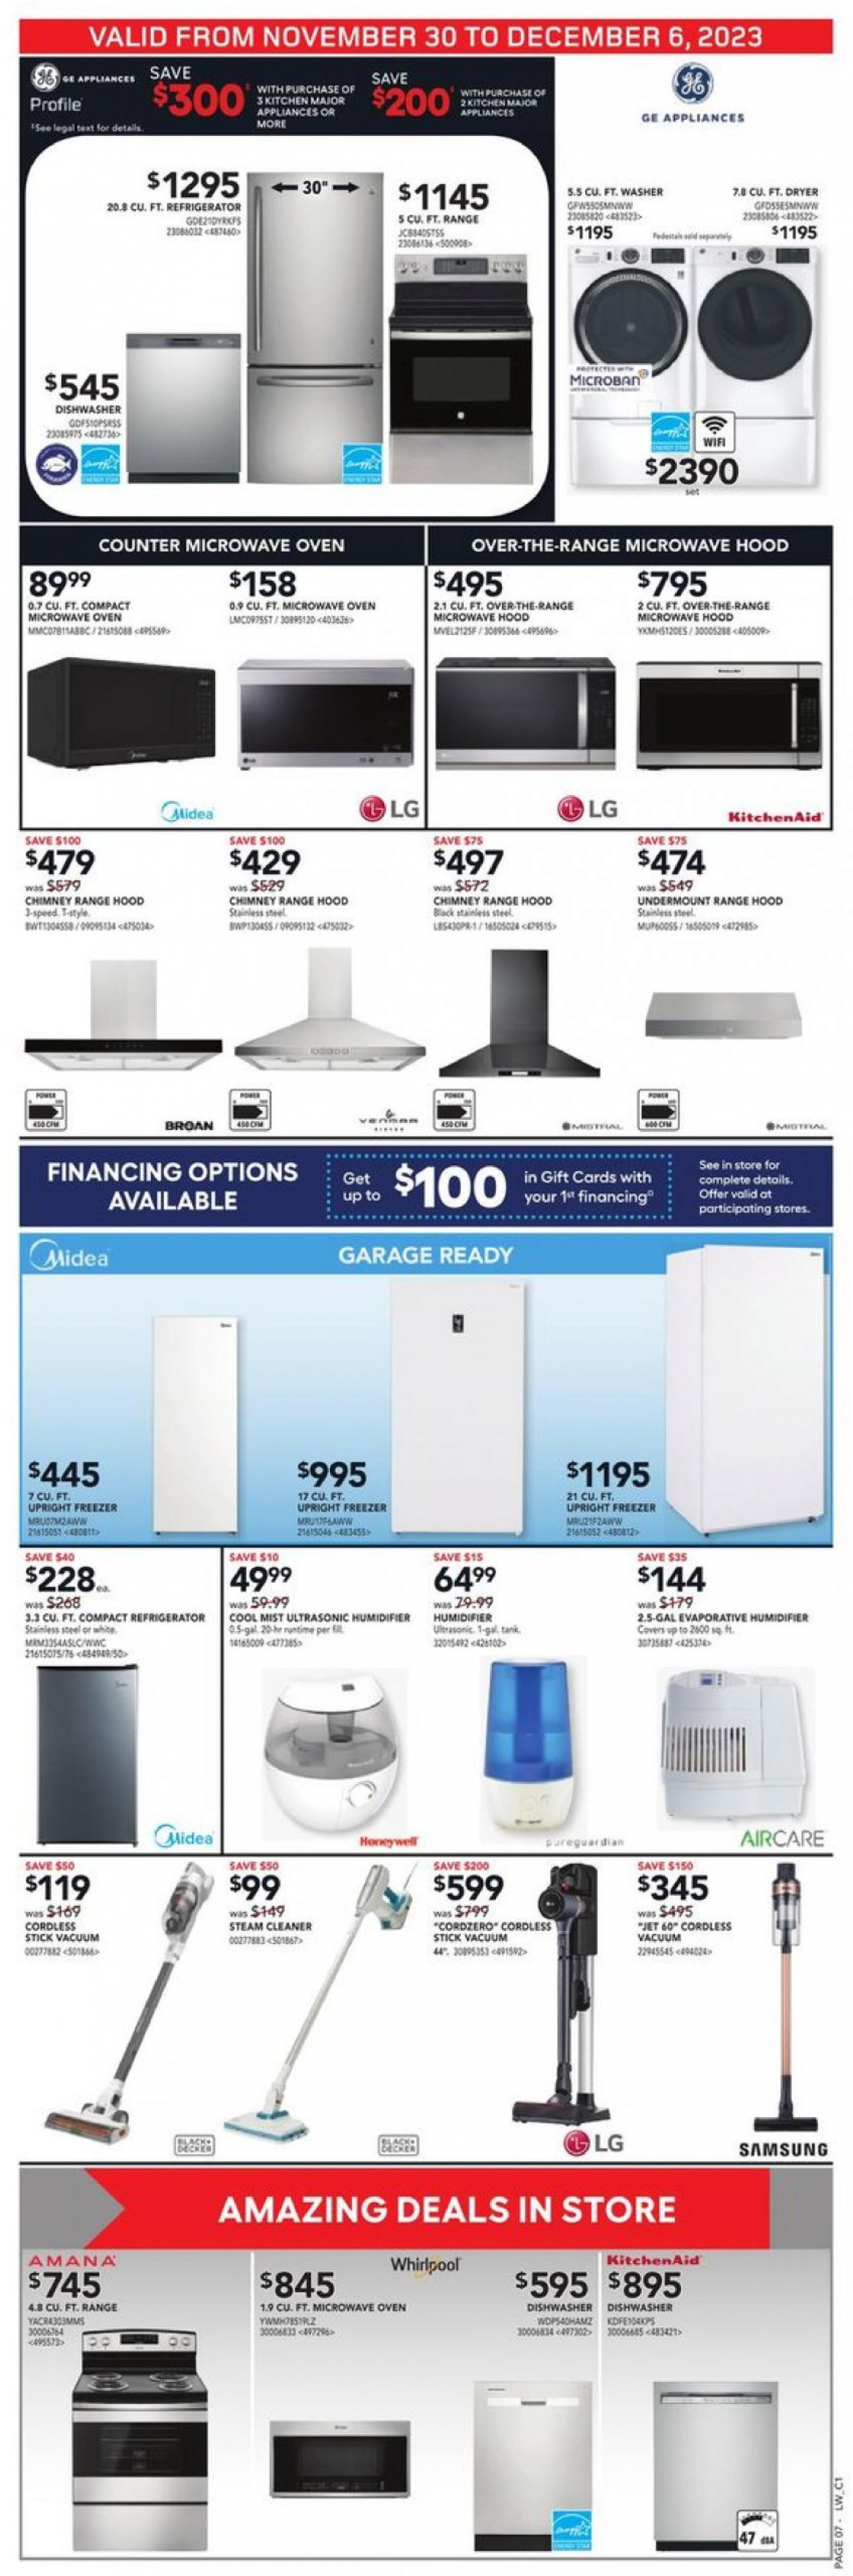 lowes - Lowe's valid from 30.11.2023 - page: 10